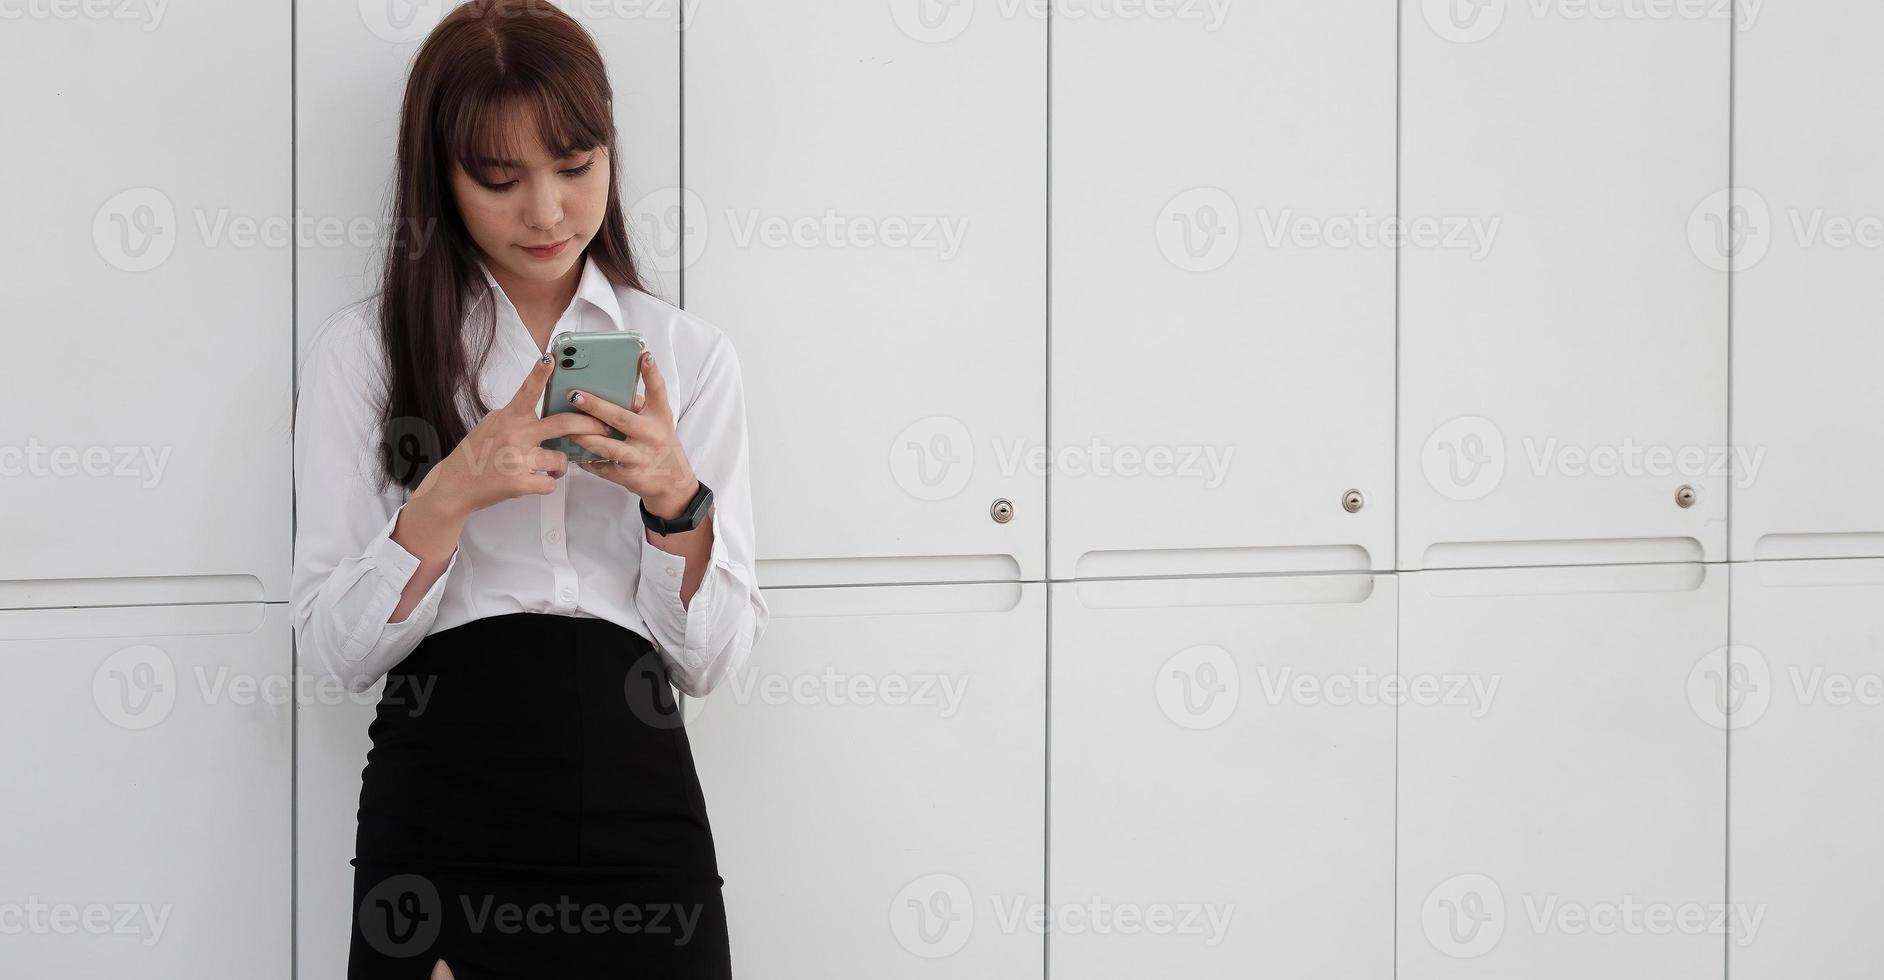 Girl standing and using mobile phone photo